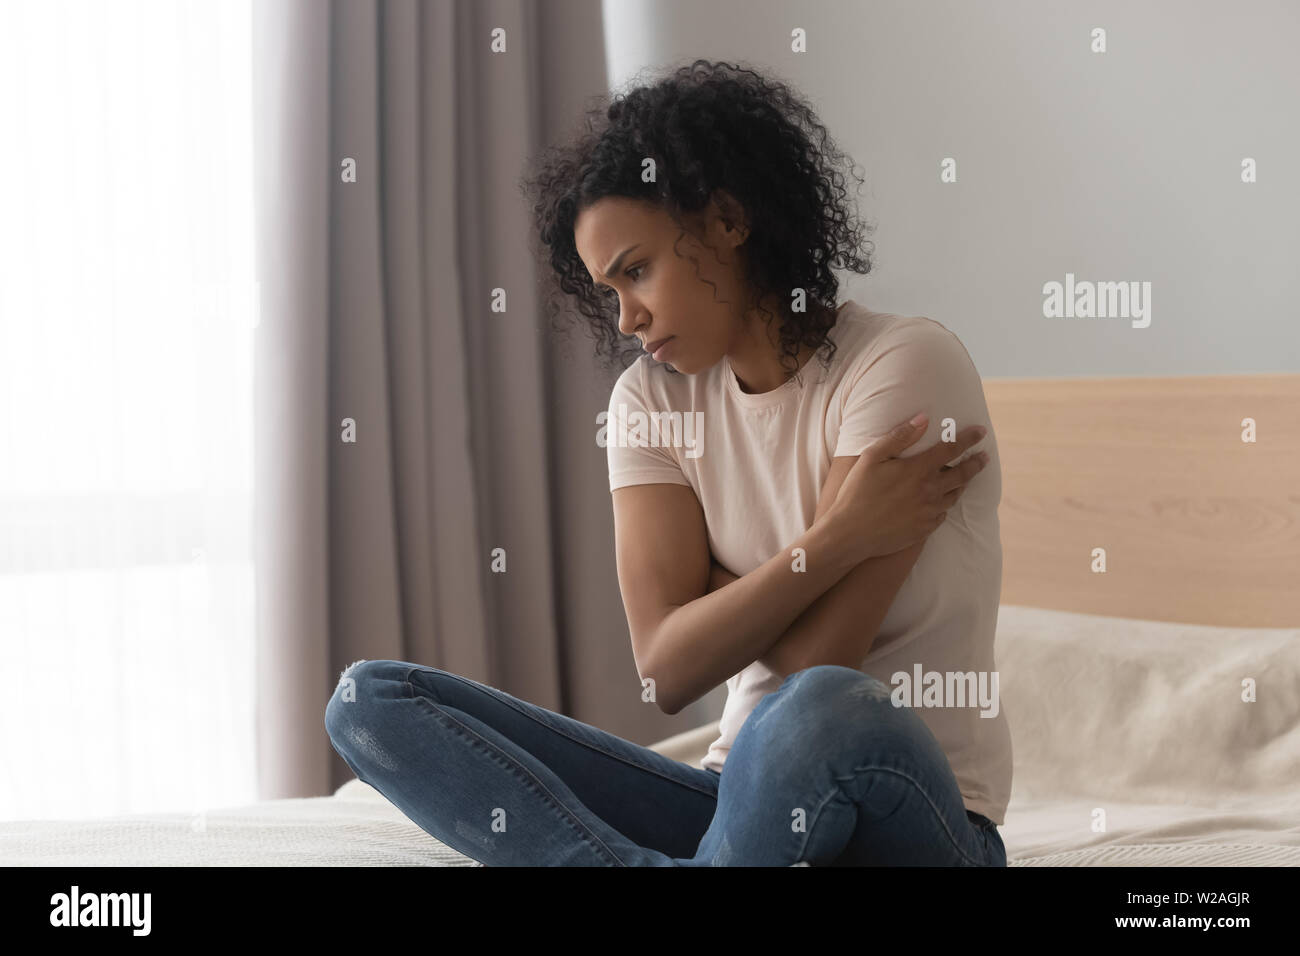 Upset depressed african woman feel sad sit alone on bed Stock Photo